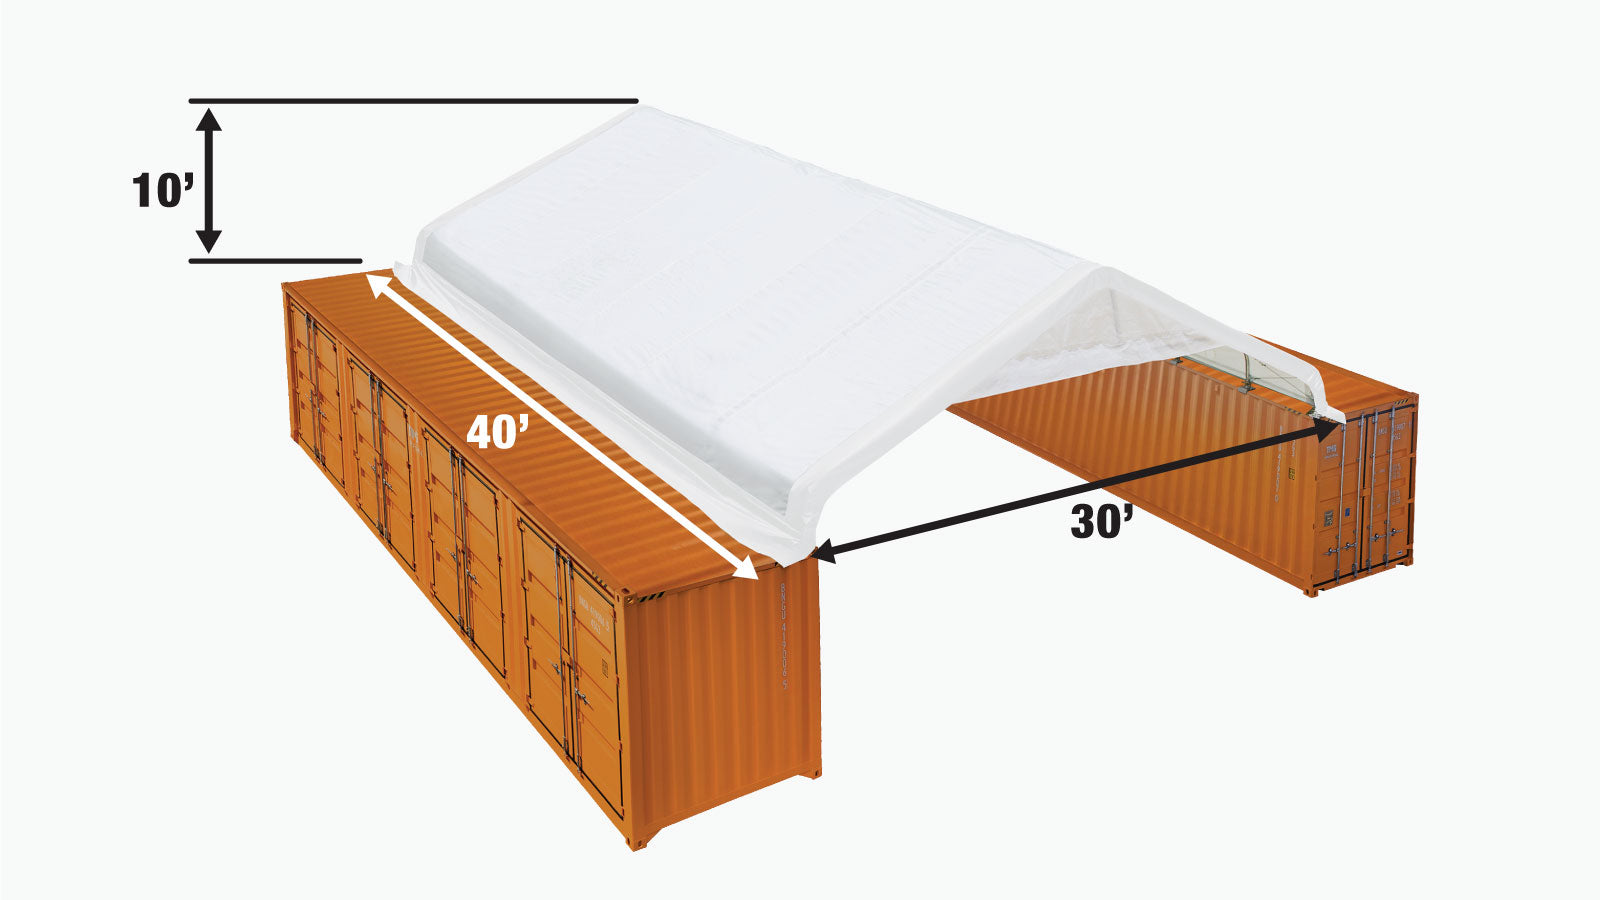 TMG Industrial 30' x 40' PVC Fabric Container Peak Roof Shelter with End Wall & Partial Front Drop Pro Series, Fire Retardant, Water Resistant, UV Protected, TMG-ST3041CVF (Previously ST3040CVF)-specifications-image